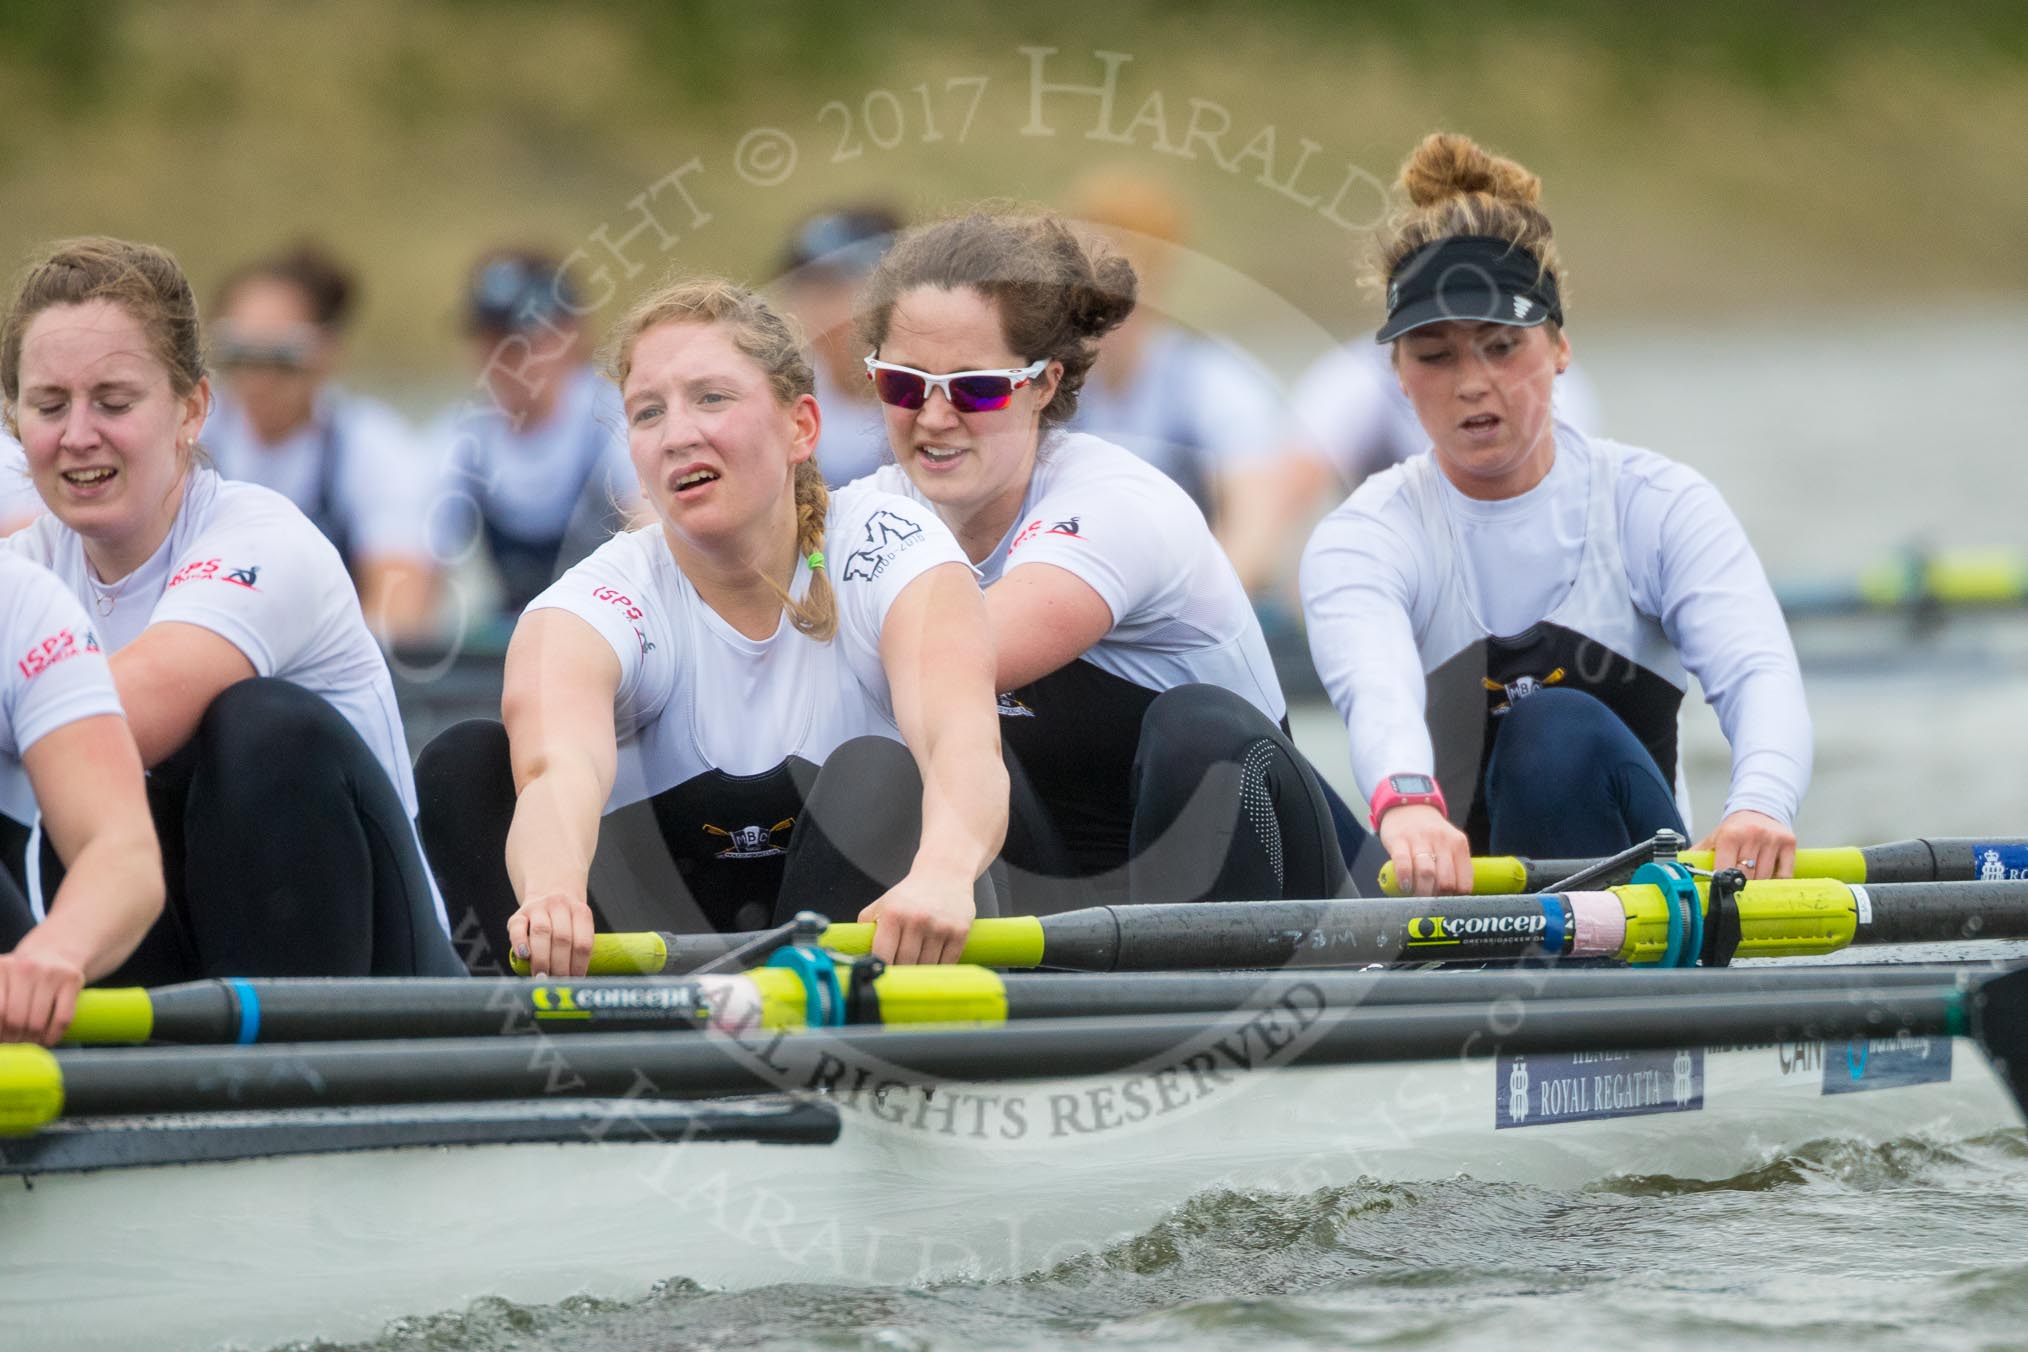 The Cancer Research UK Boat Race season 2017 - Women's Boat Race Fixture OUWBC vs Molesey BC: The Molesey Eight, a bit behind OUWBC - 4 Claire McKeown, 3 Lucy Primmer, 2 Caitlin Boyland, bow Emma McDonald.
River Thames between Putney Bridge and Mortlake,
London SW15,

United Kingdom,
on 19 March 2017 at 16:10, image #114